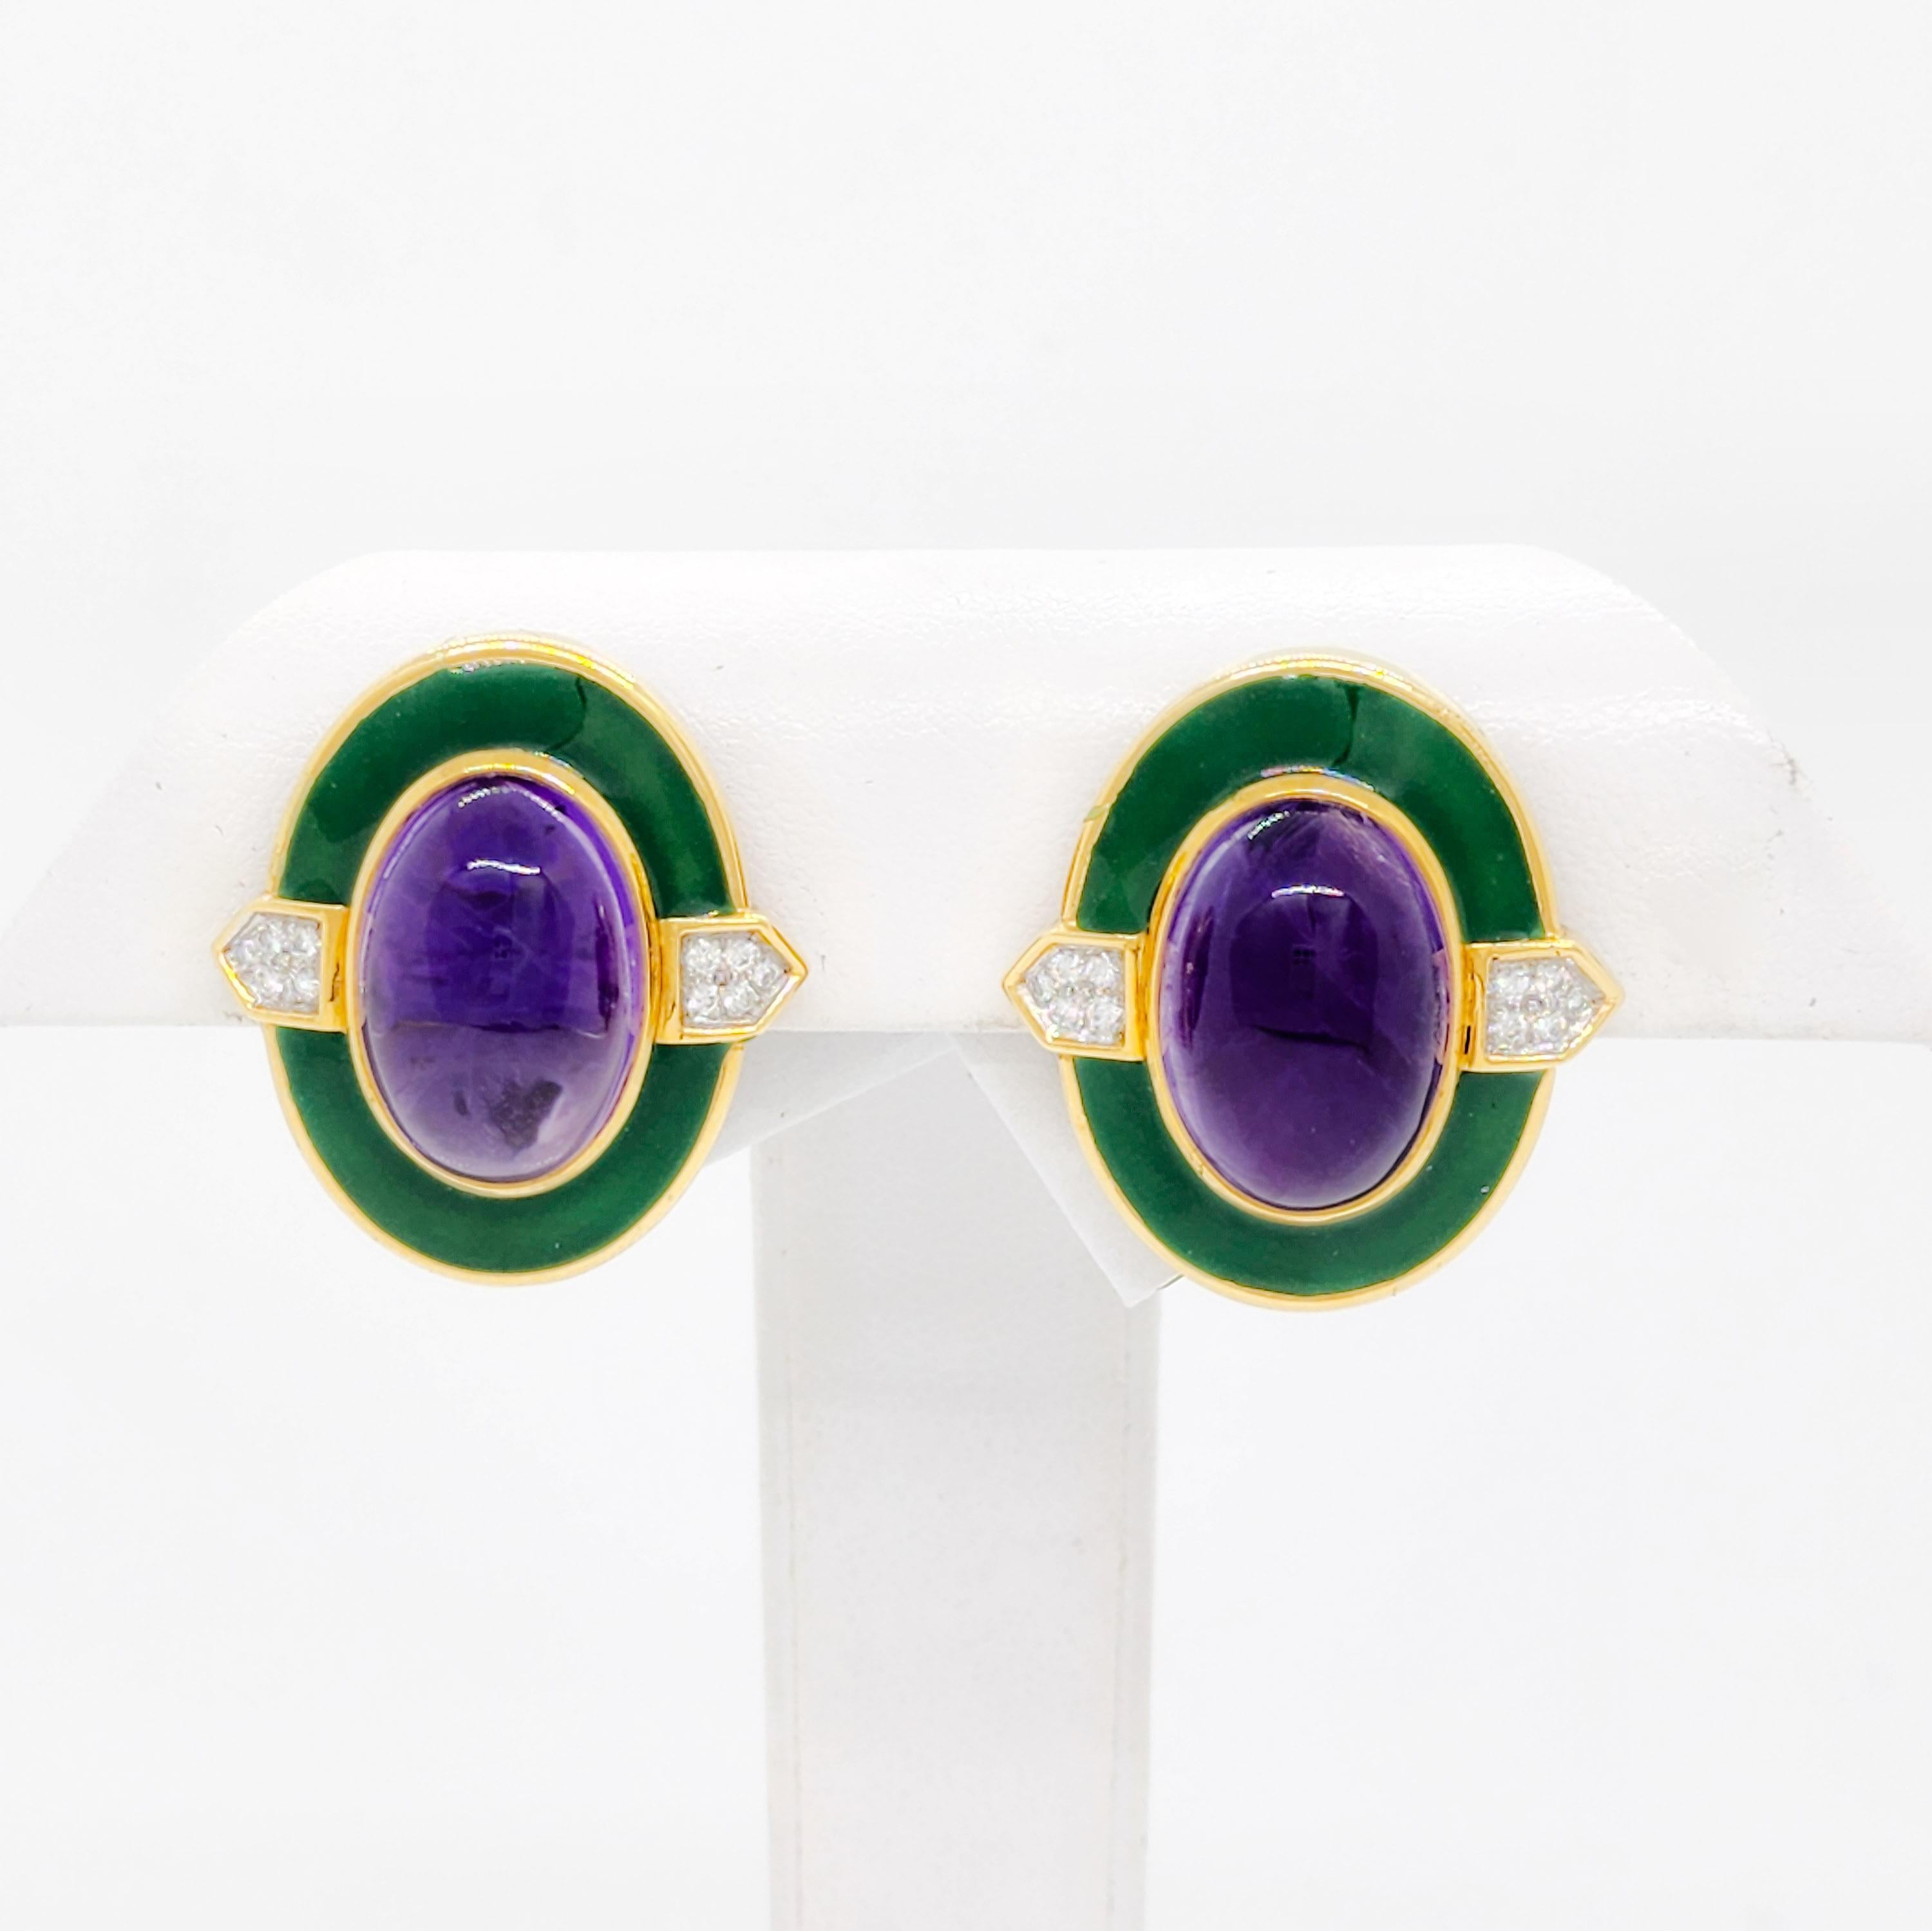 Beautiful big amethyst cabochon ovals with good quality white diamond rounds and green enamel.  Handmade in 18k yellow gold.  Mint condition.